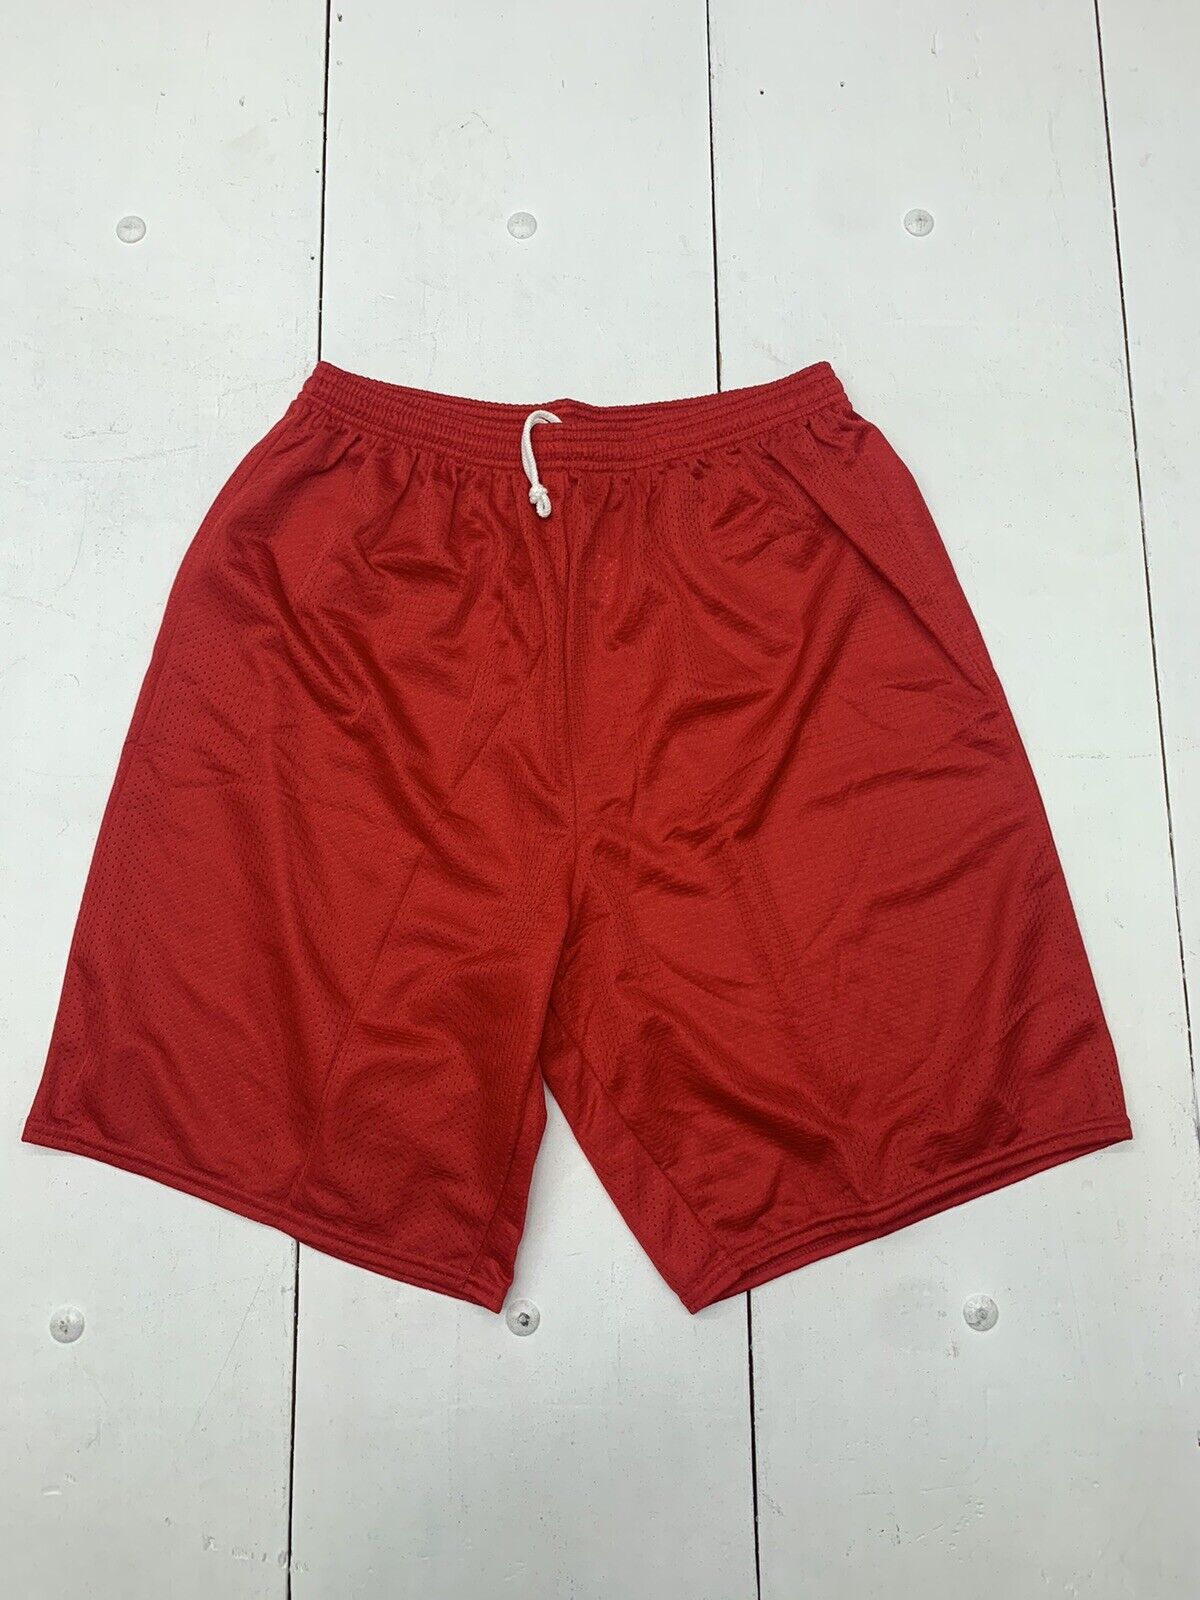 Alleson Mens Red Mesh Athletic Shorts Size XL